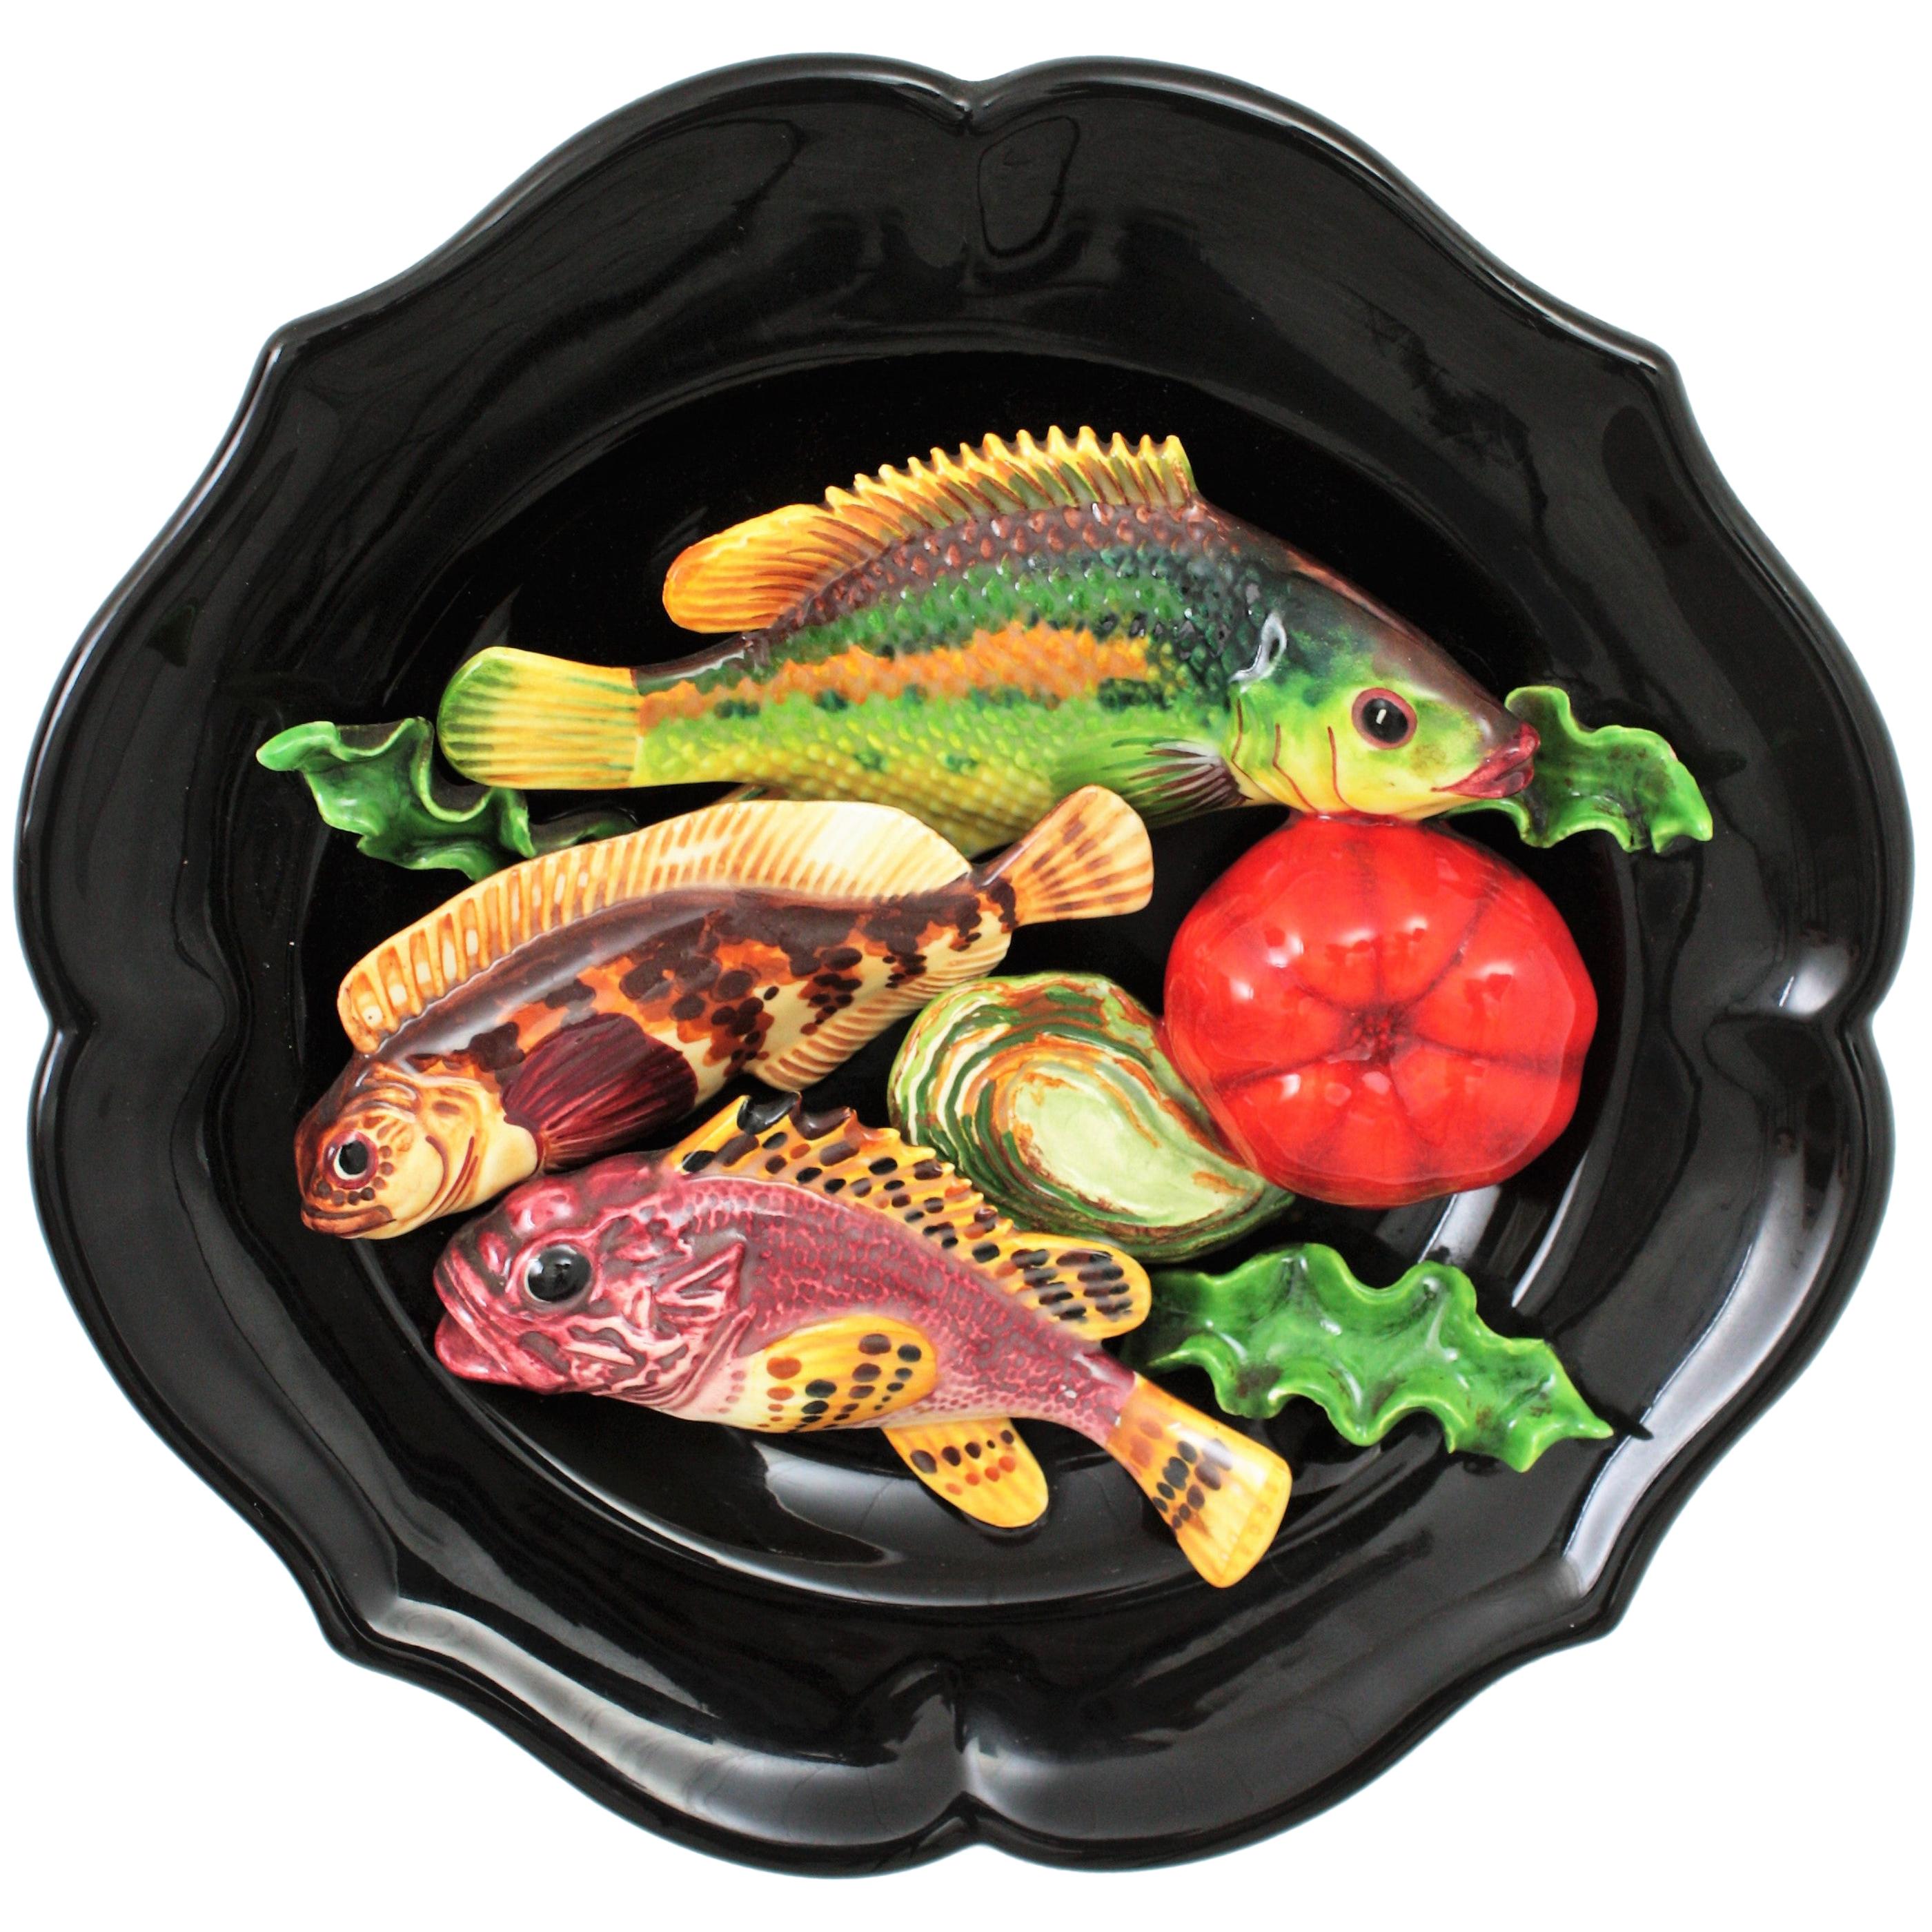 Vallauris Majolica Ceramic Large Wall Plate Trompe L'oeil Seafood Design For Sale